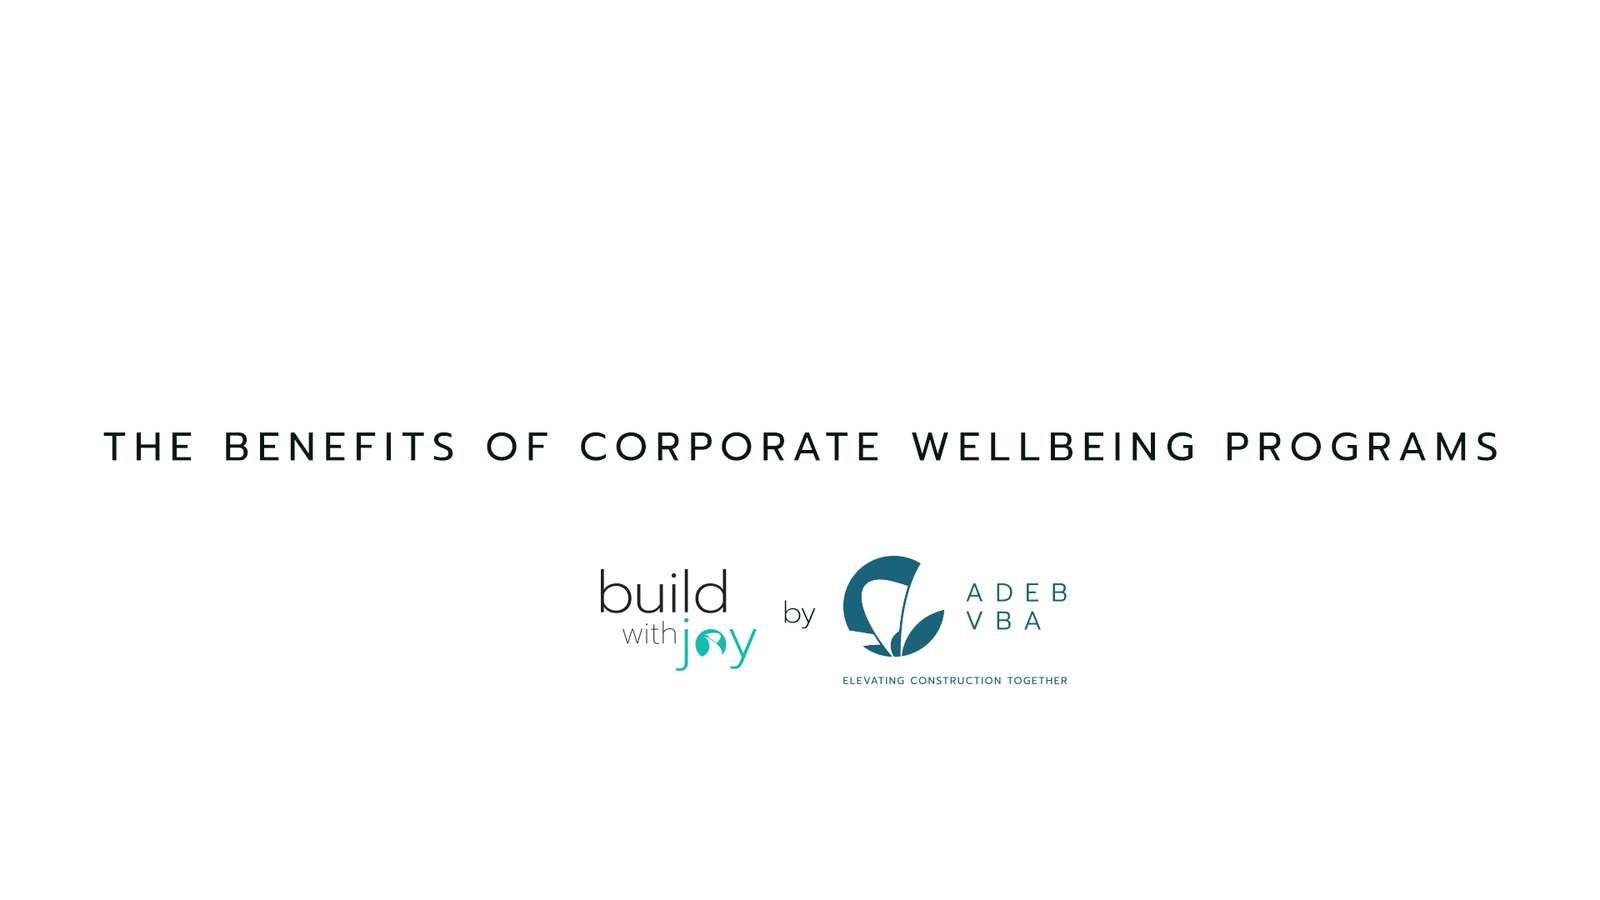 The Benefits of Corporate Wellbeing Programs